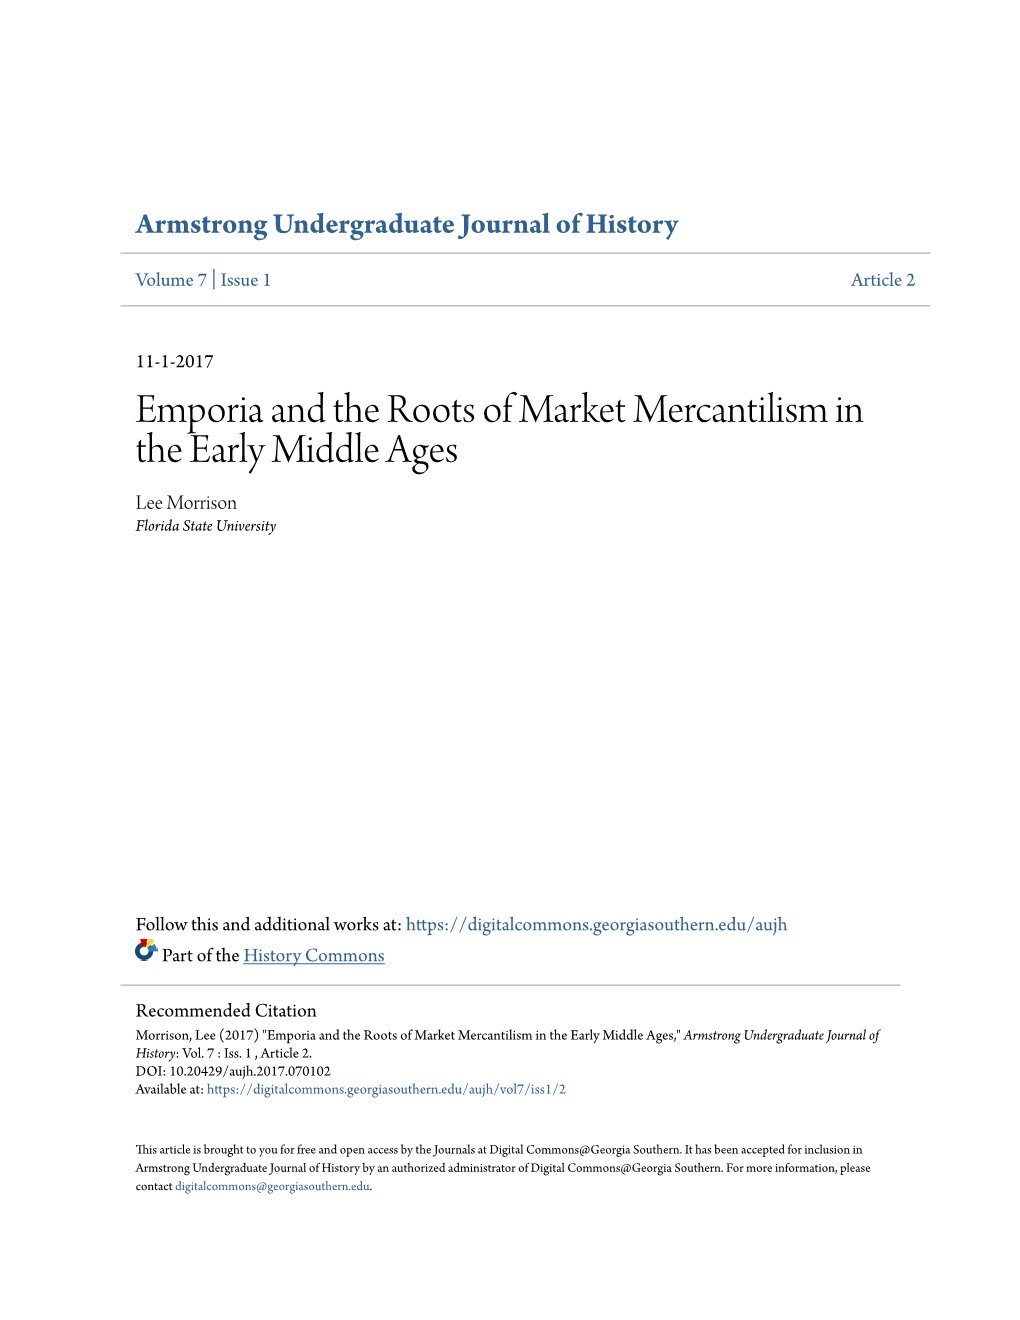 Emporia and the Roots of Market Mercantilism in the Early Middle Ages Lee Morrison Florida State University